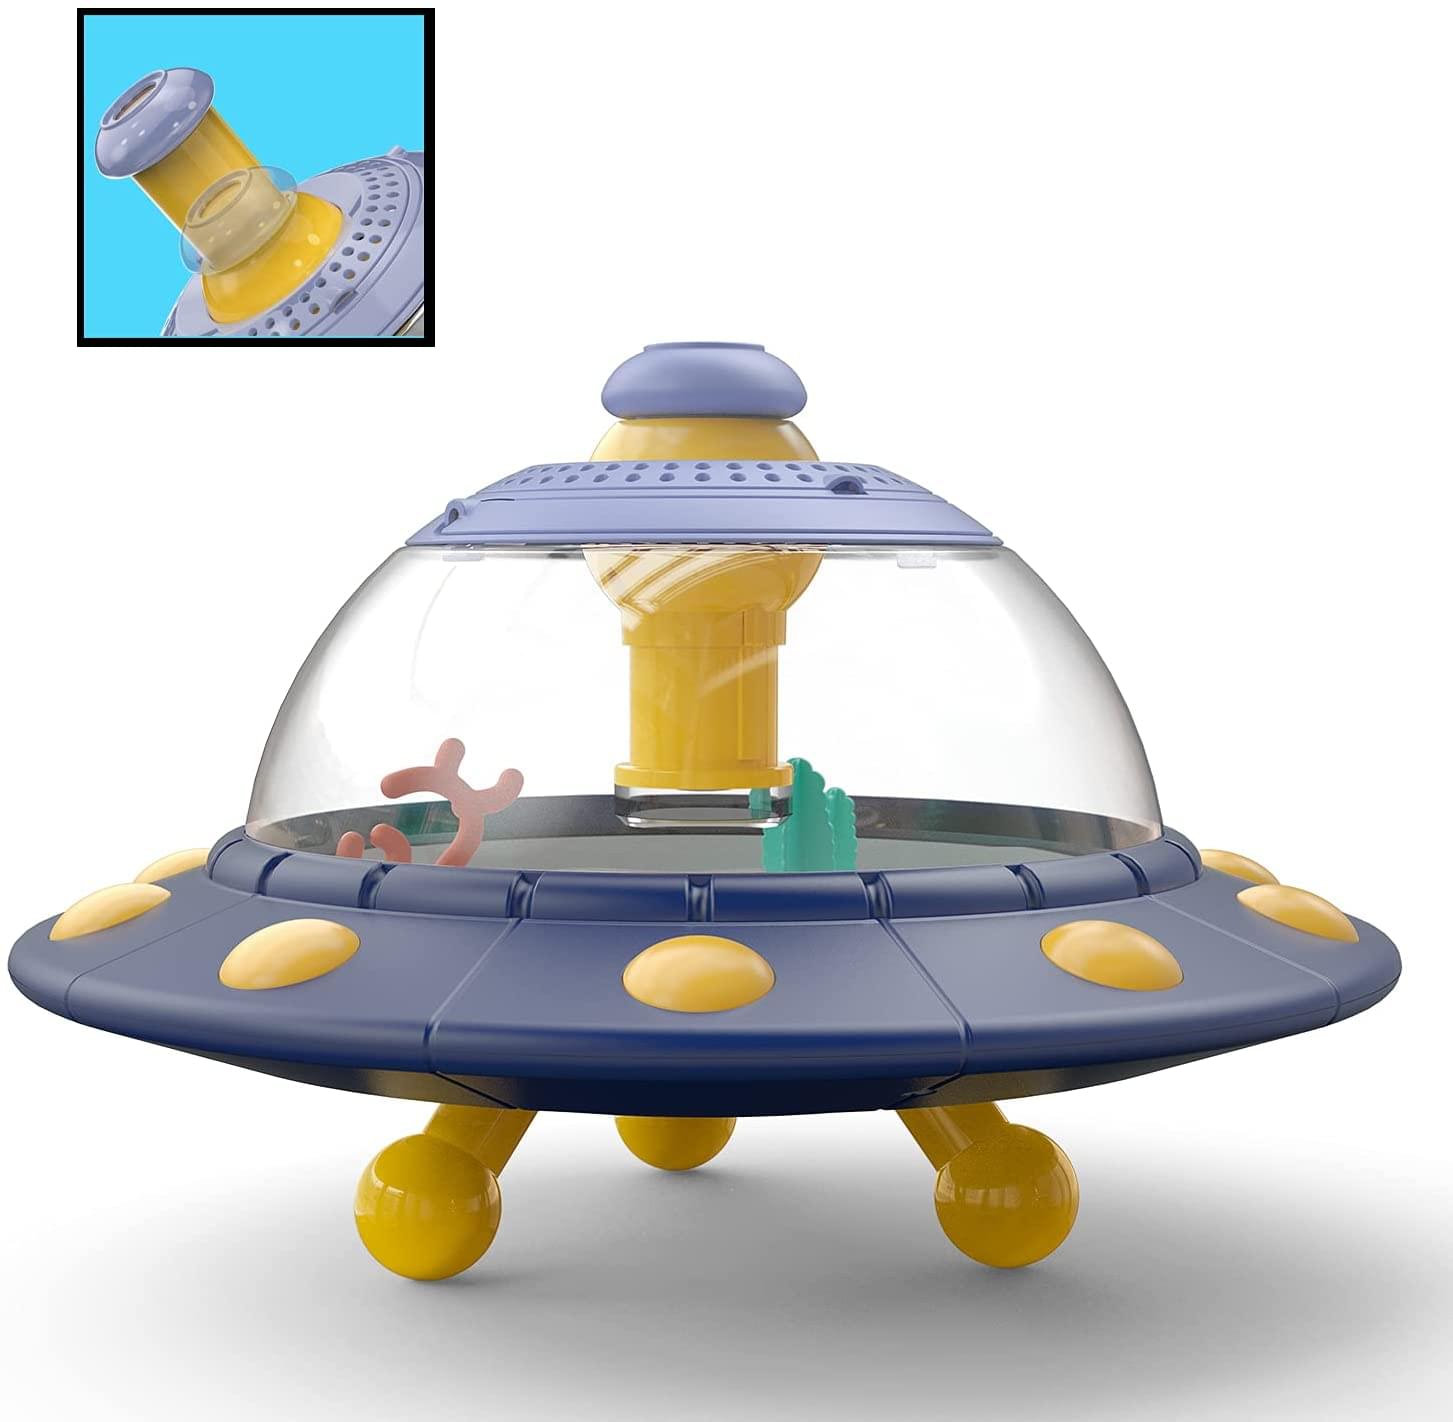 Curious Mind UFO Biosphere Educational Toy